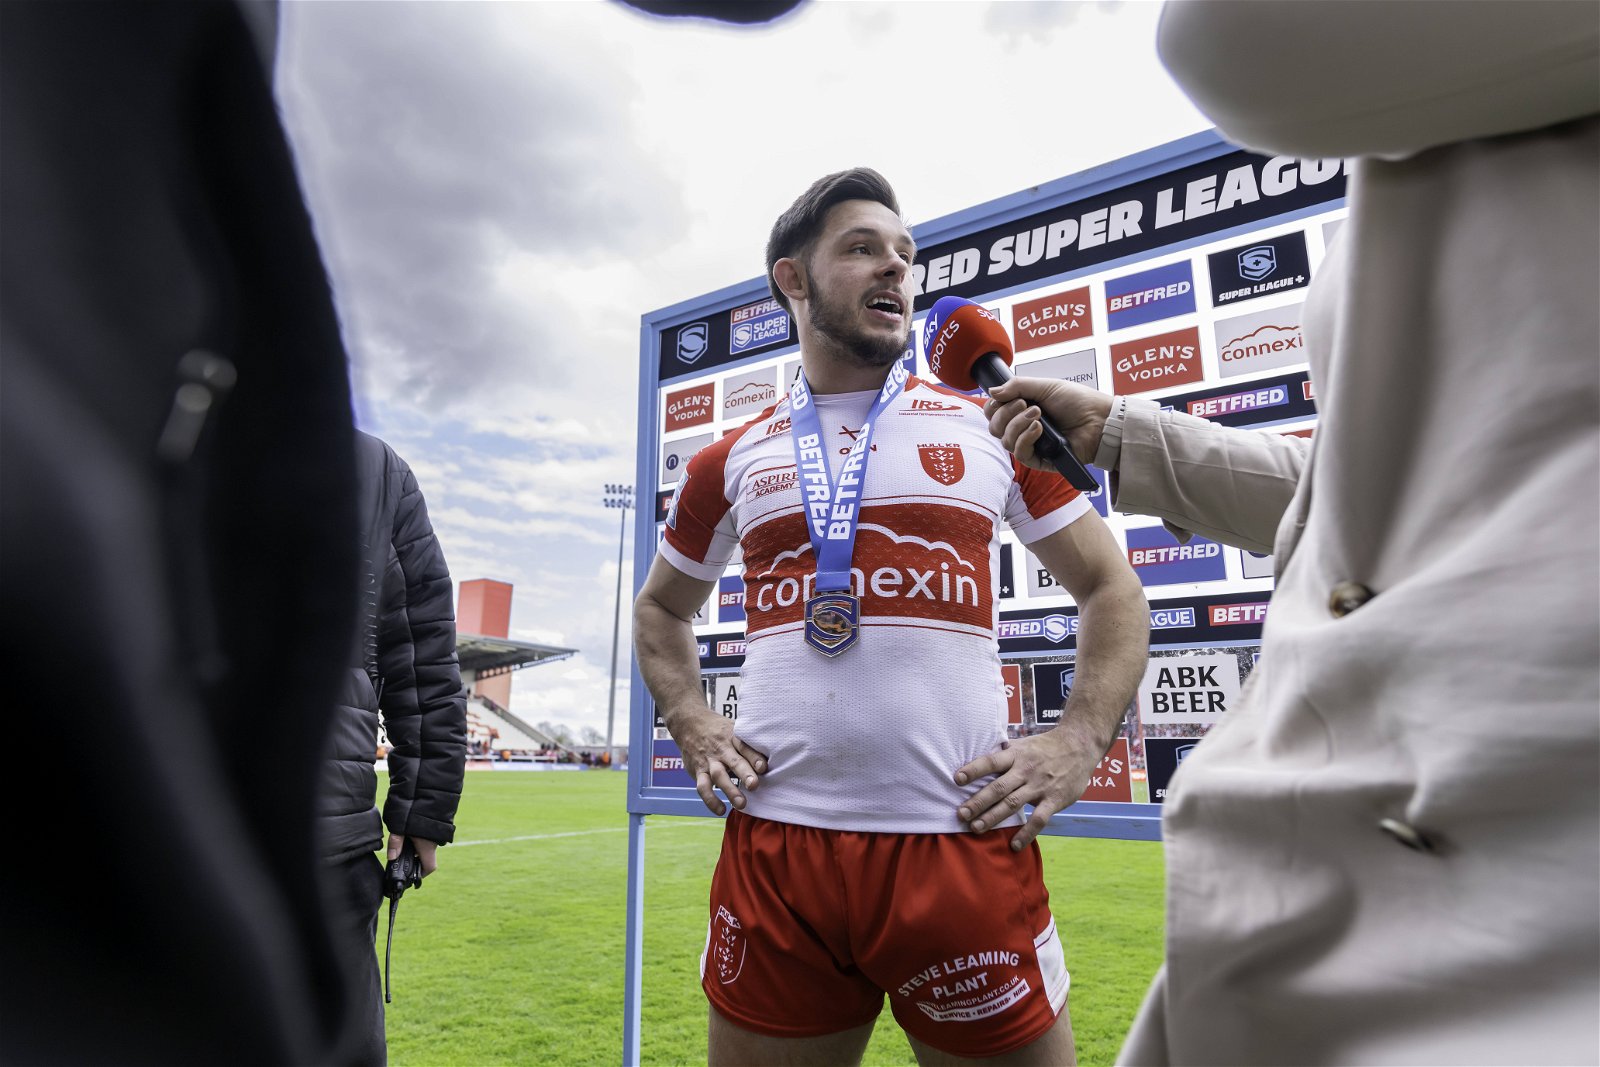 Hull KR's Niall Evalds being interviewed after a Super League victory over Hull FC. Being Player of the Match, he has a medal on.